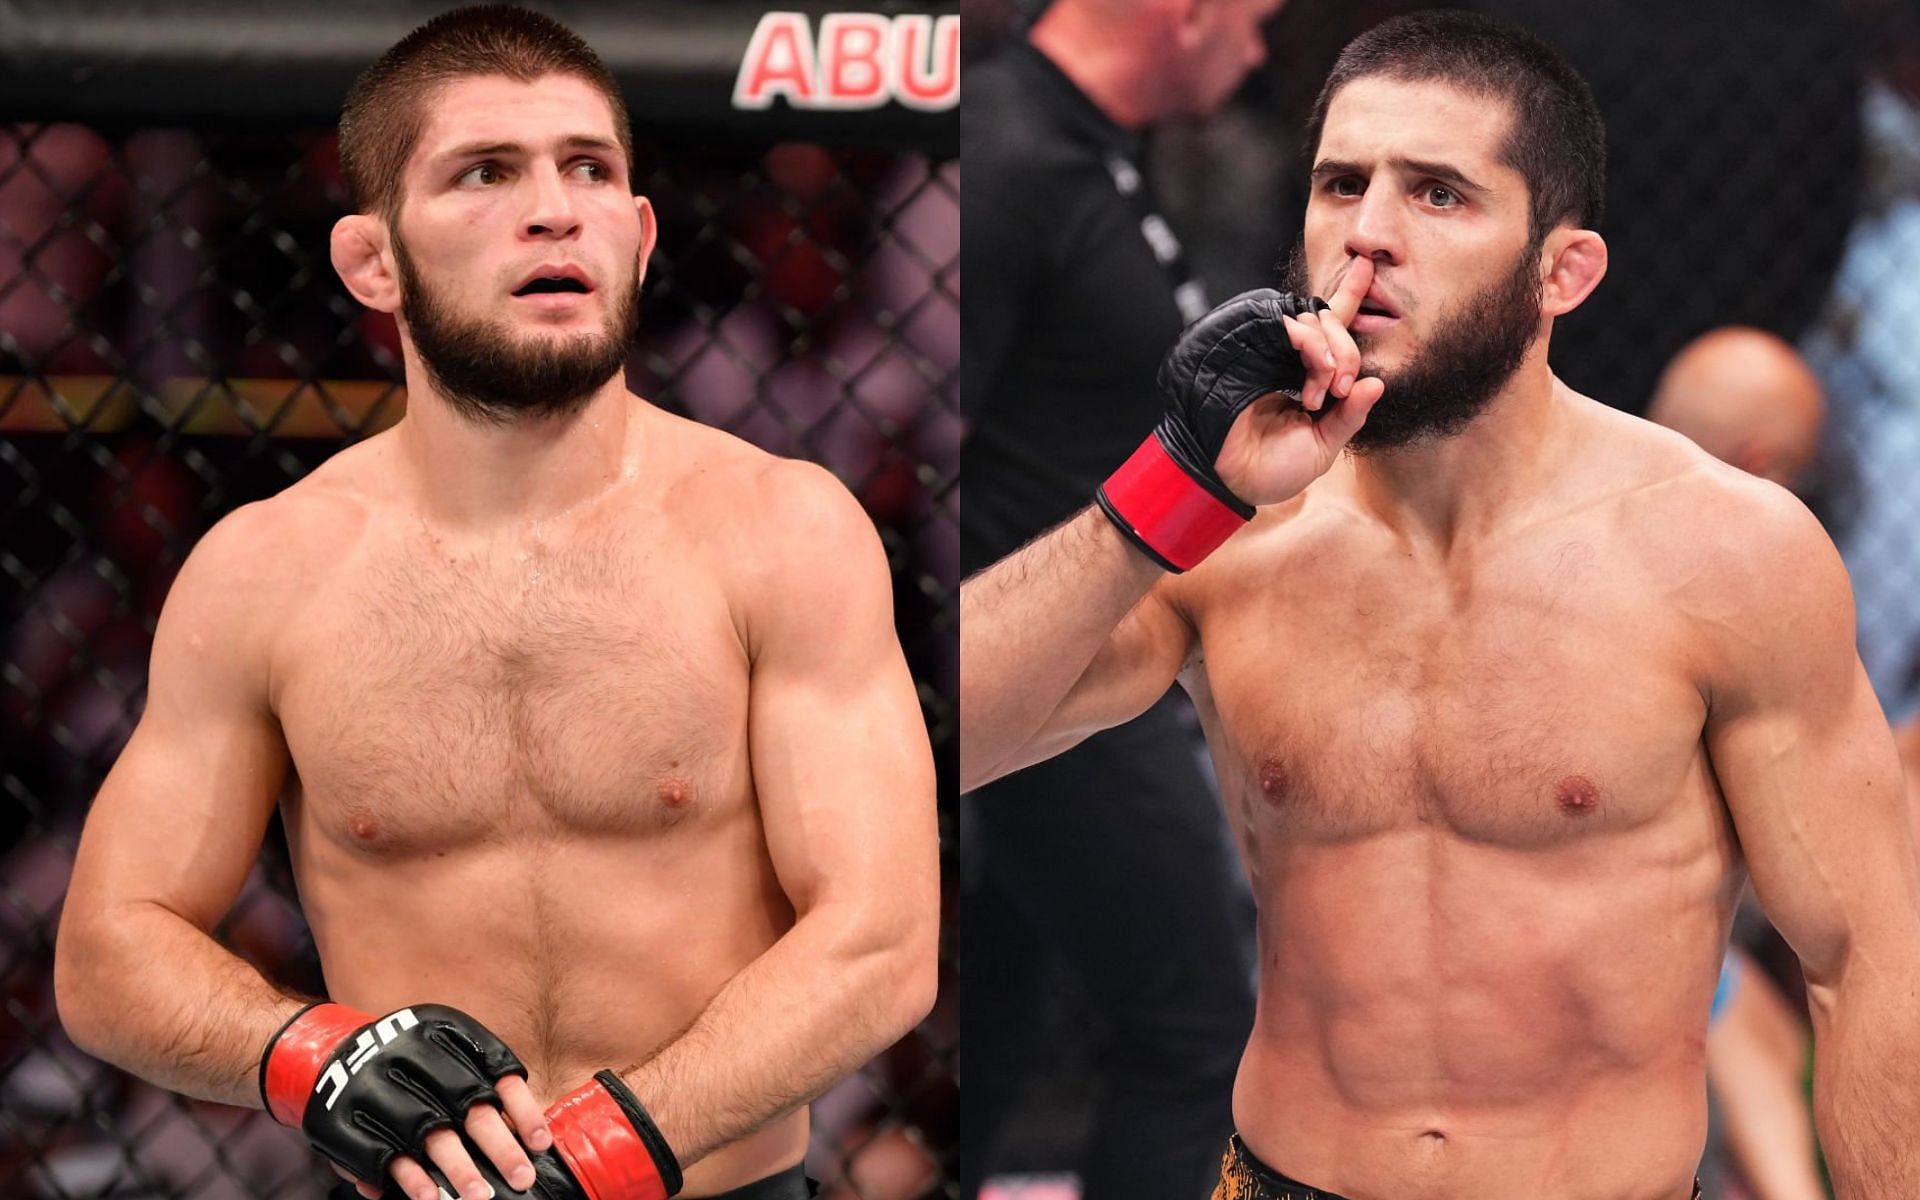 Khabib Nurmagomedov (left) and Islam Makhachev (right) [Images Courtesy: @GettyImages]